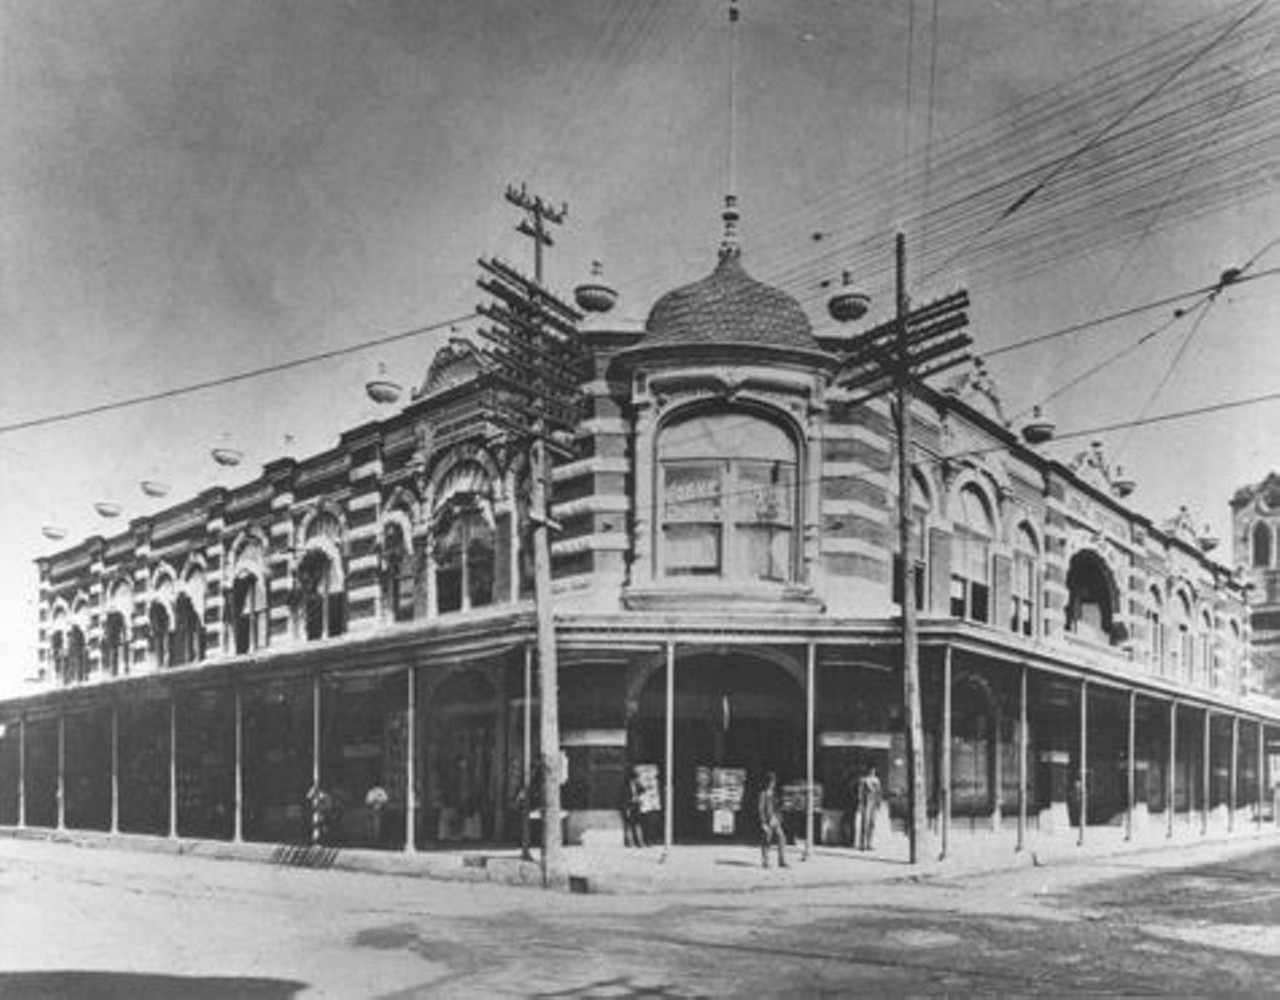 The Joske Bros. Store at Alamo and Commerce Streets before its 1909 expansion.